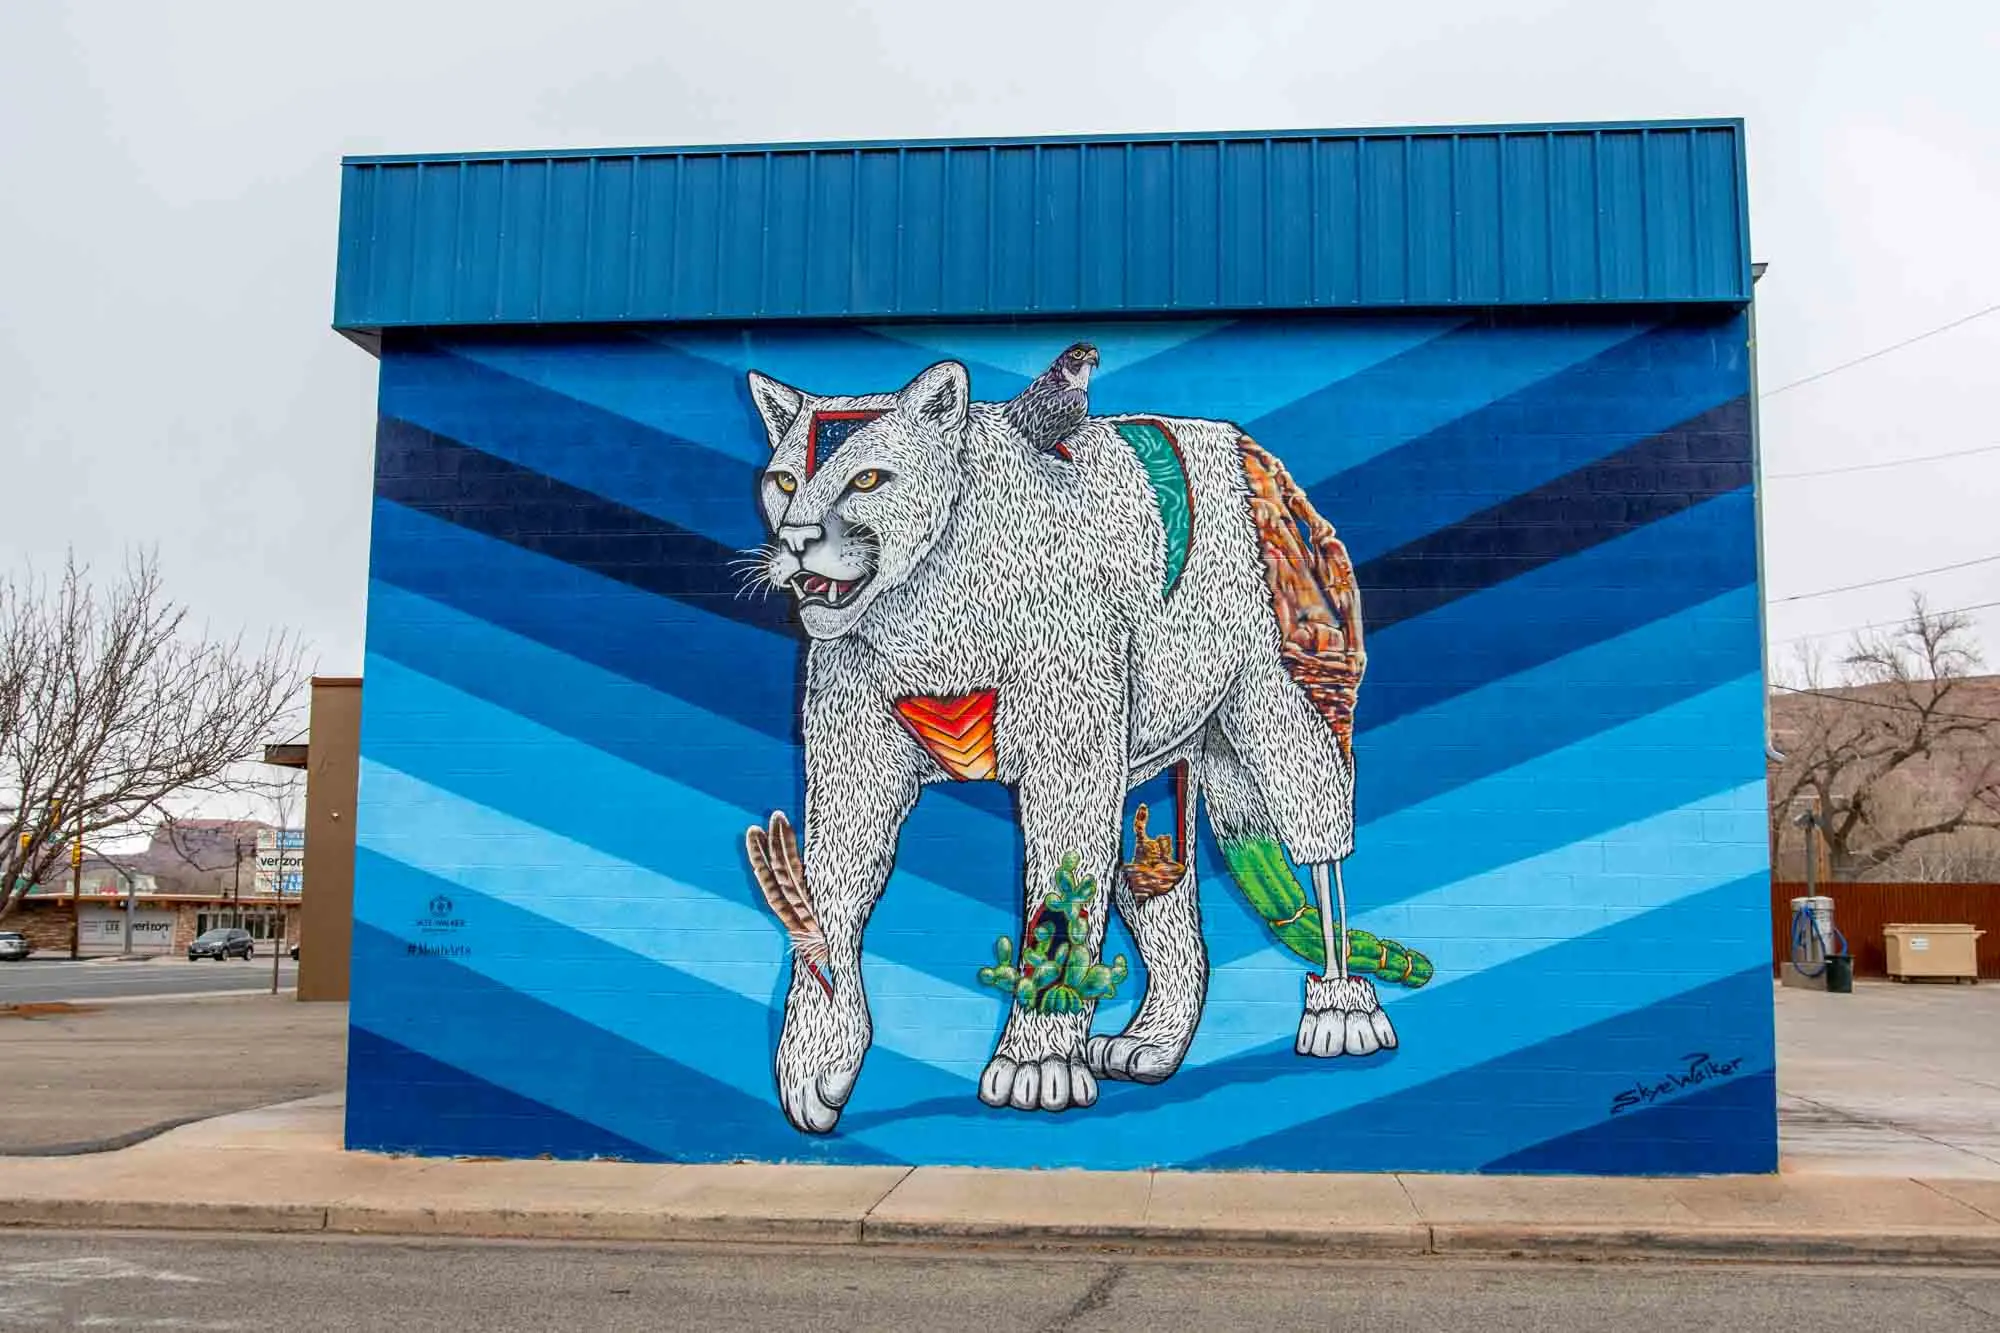 Mural of a mountain lion on side of car wash